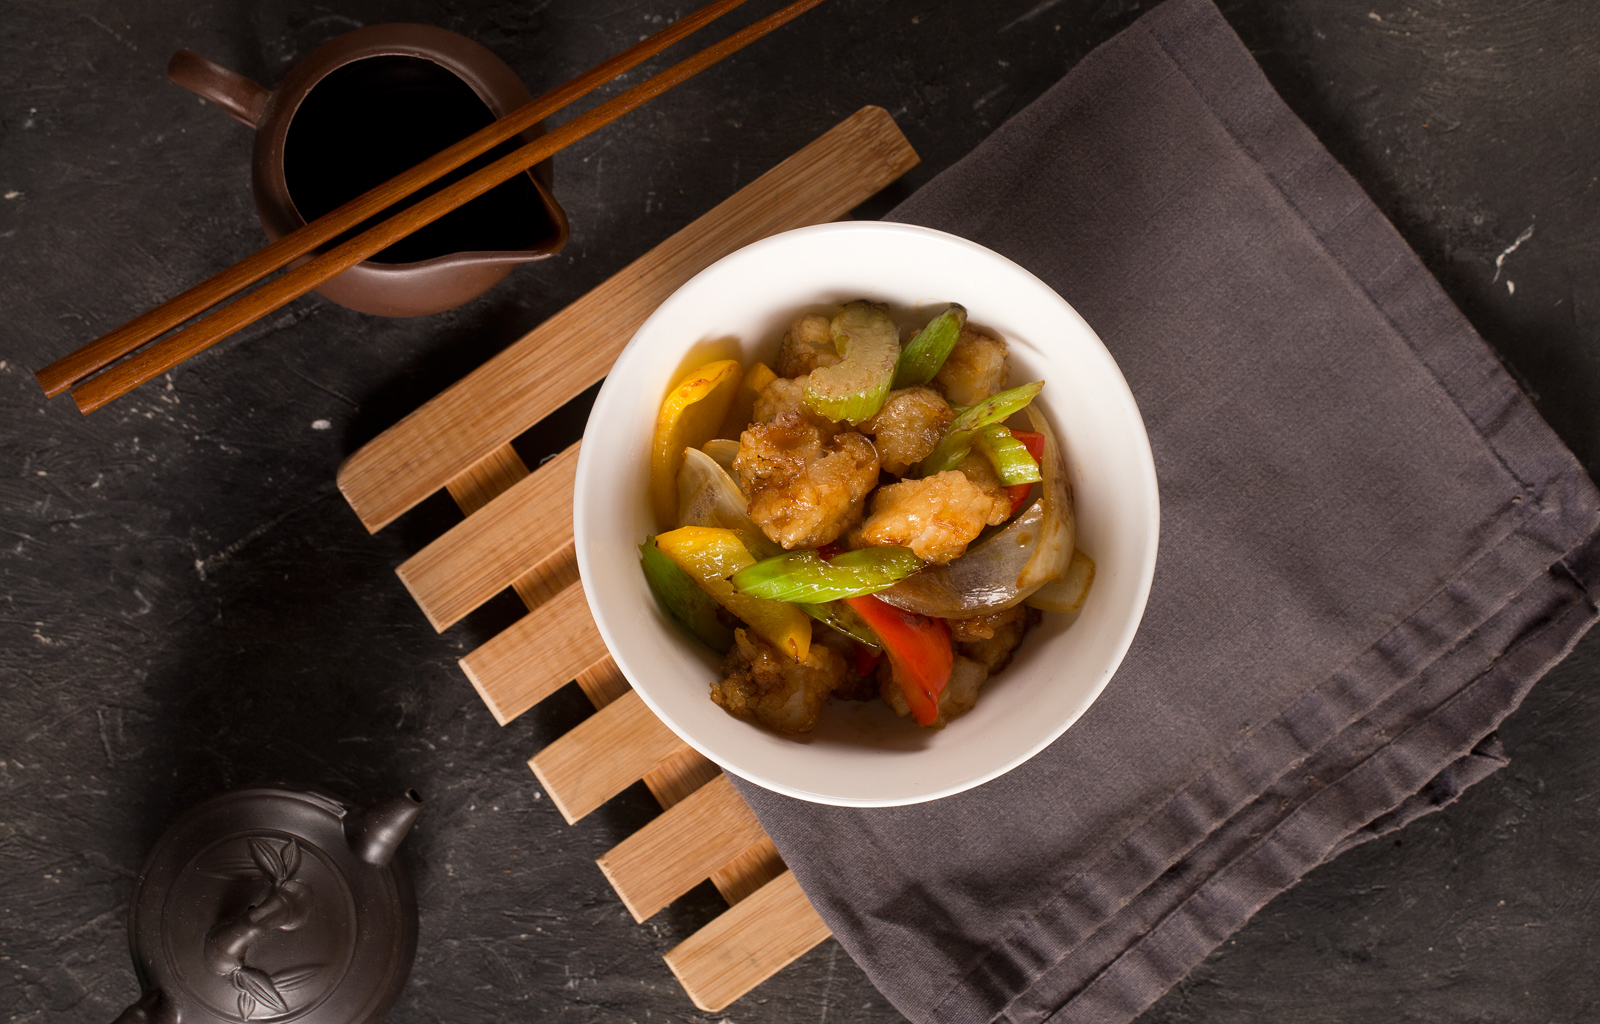 Wok-fried Giant grenadier with vegetables